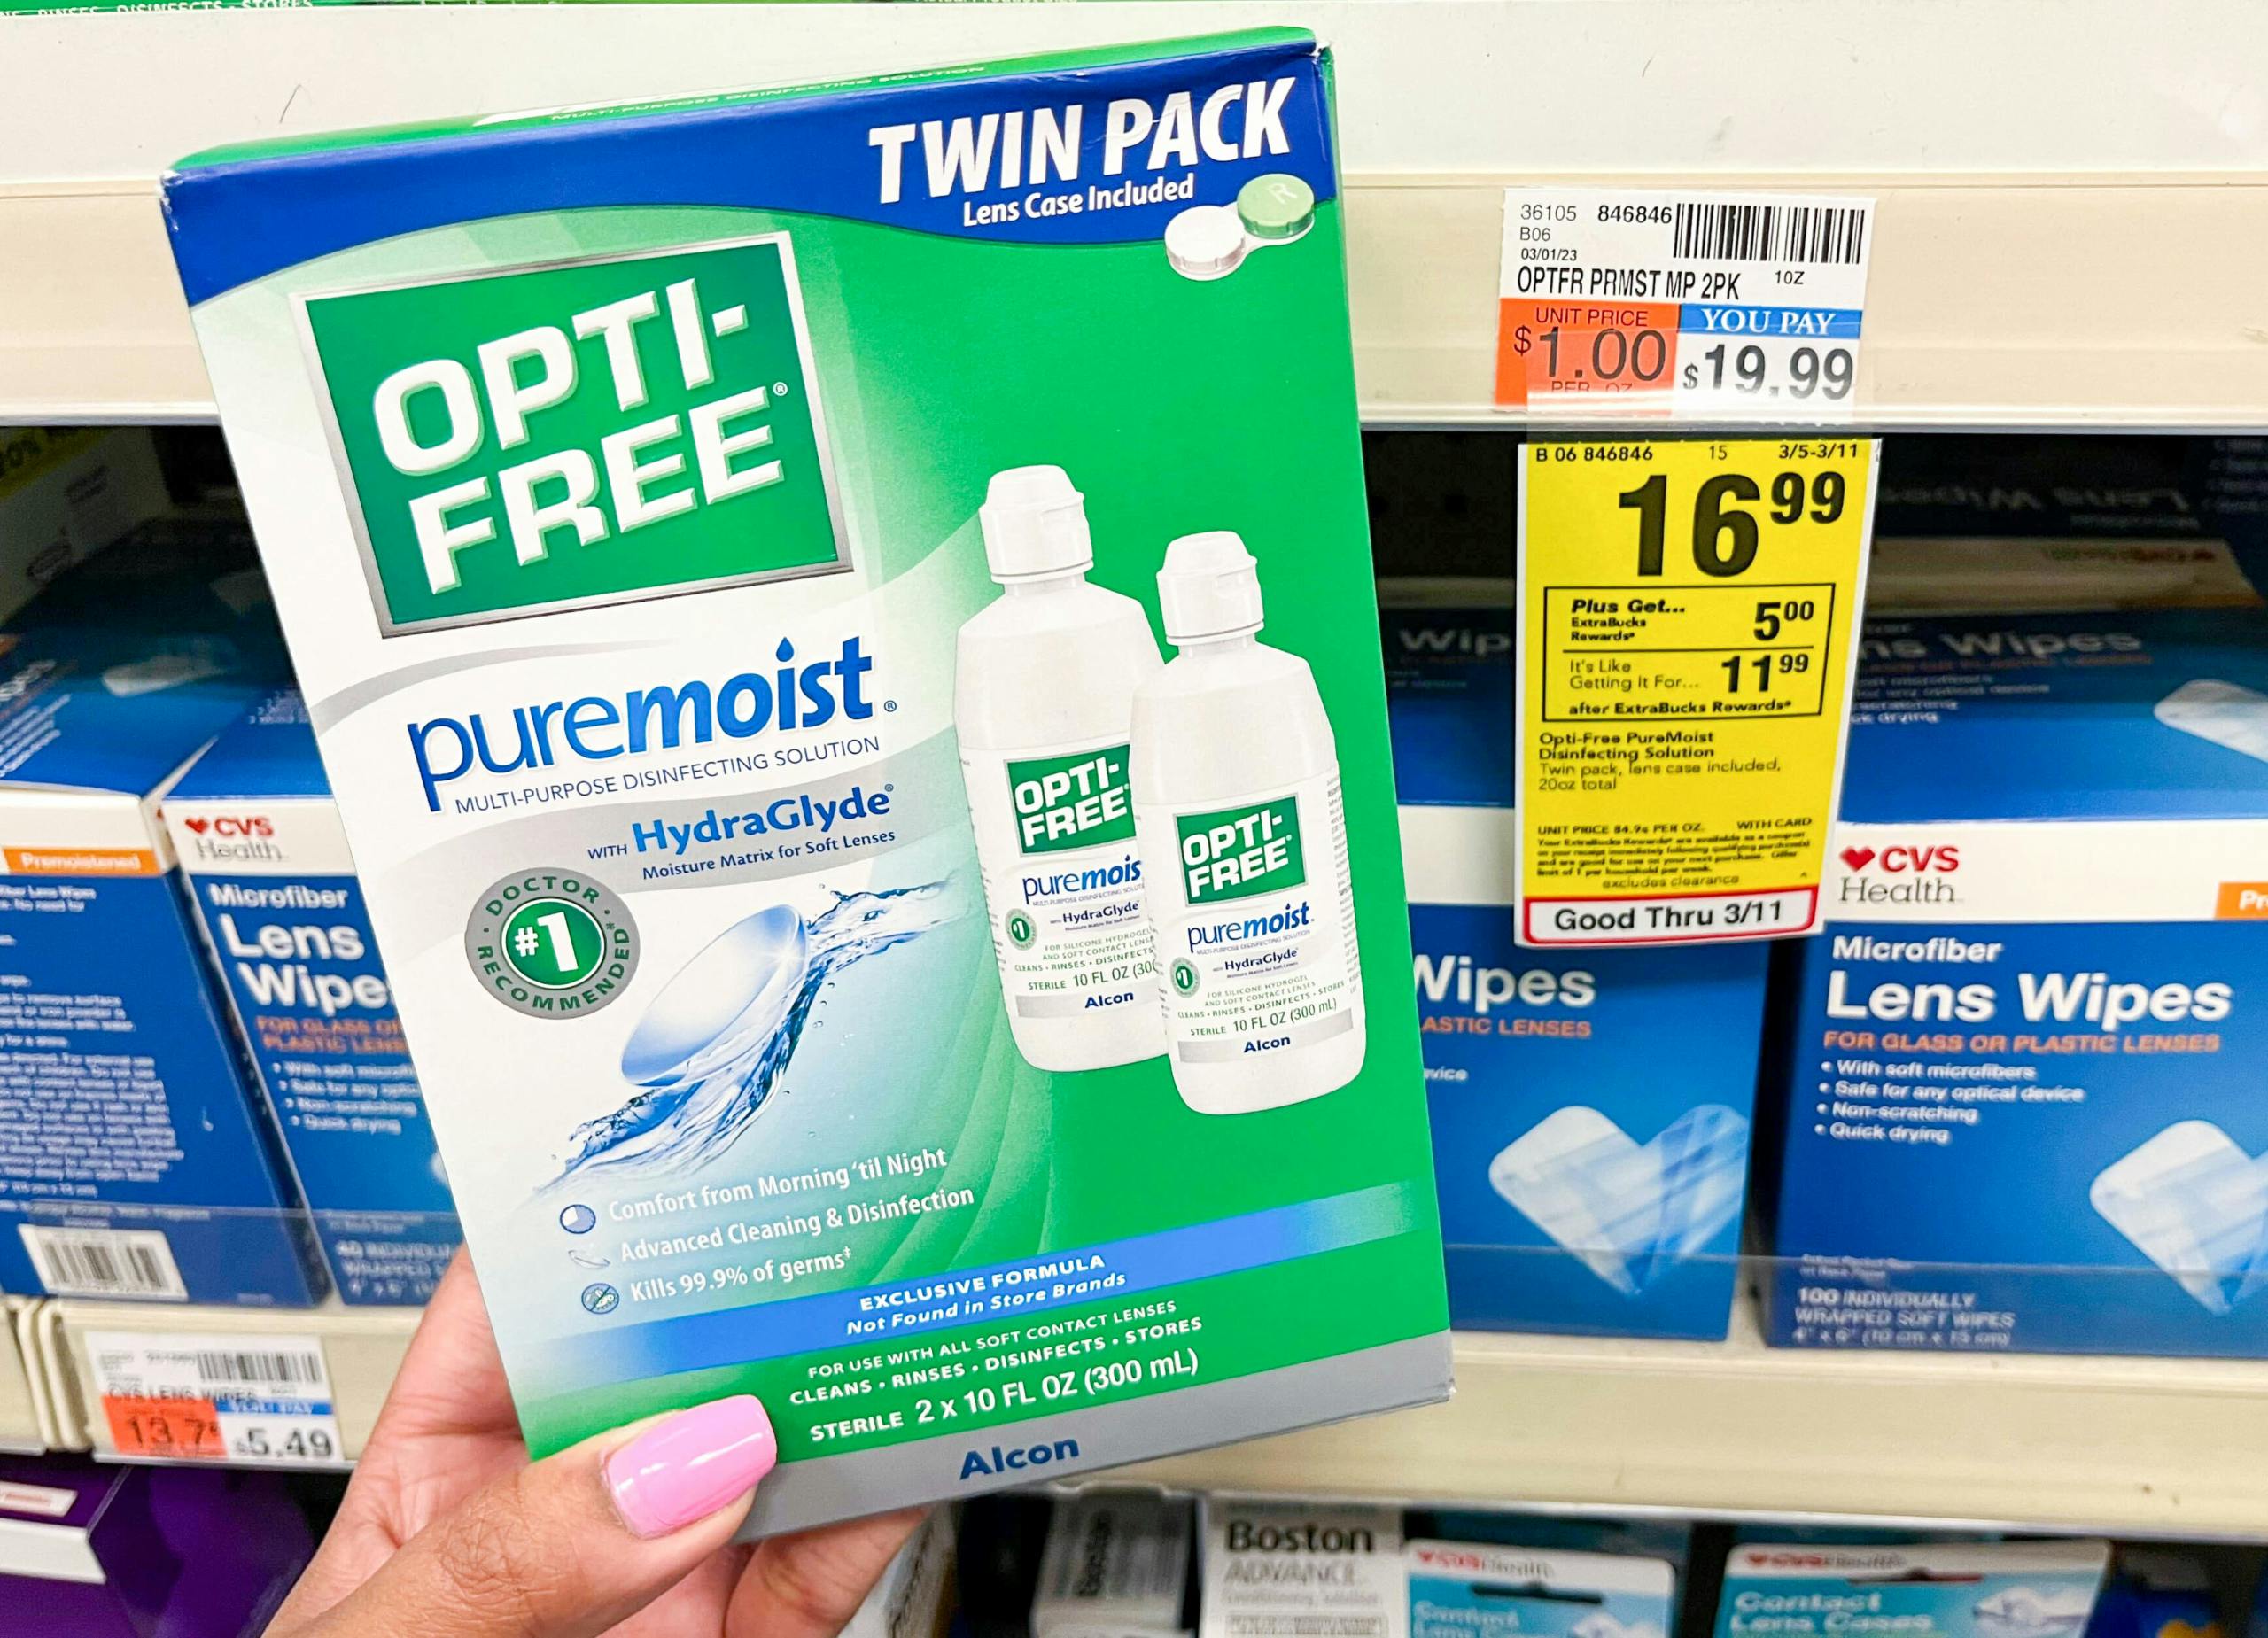 hand holding one box of opti-free pure moist solution next to sales tag